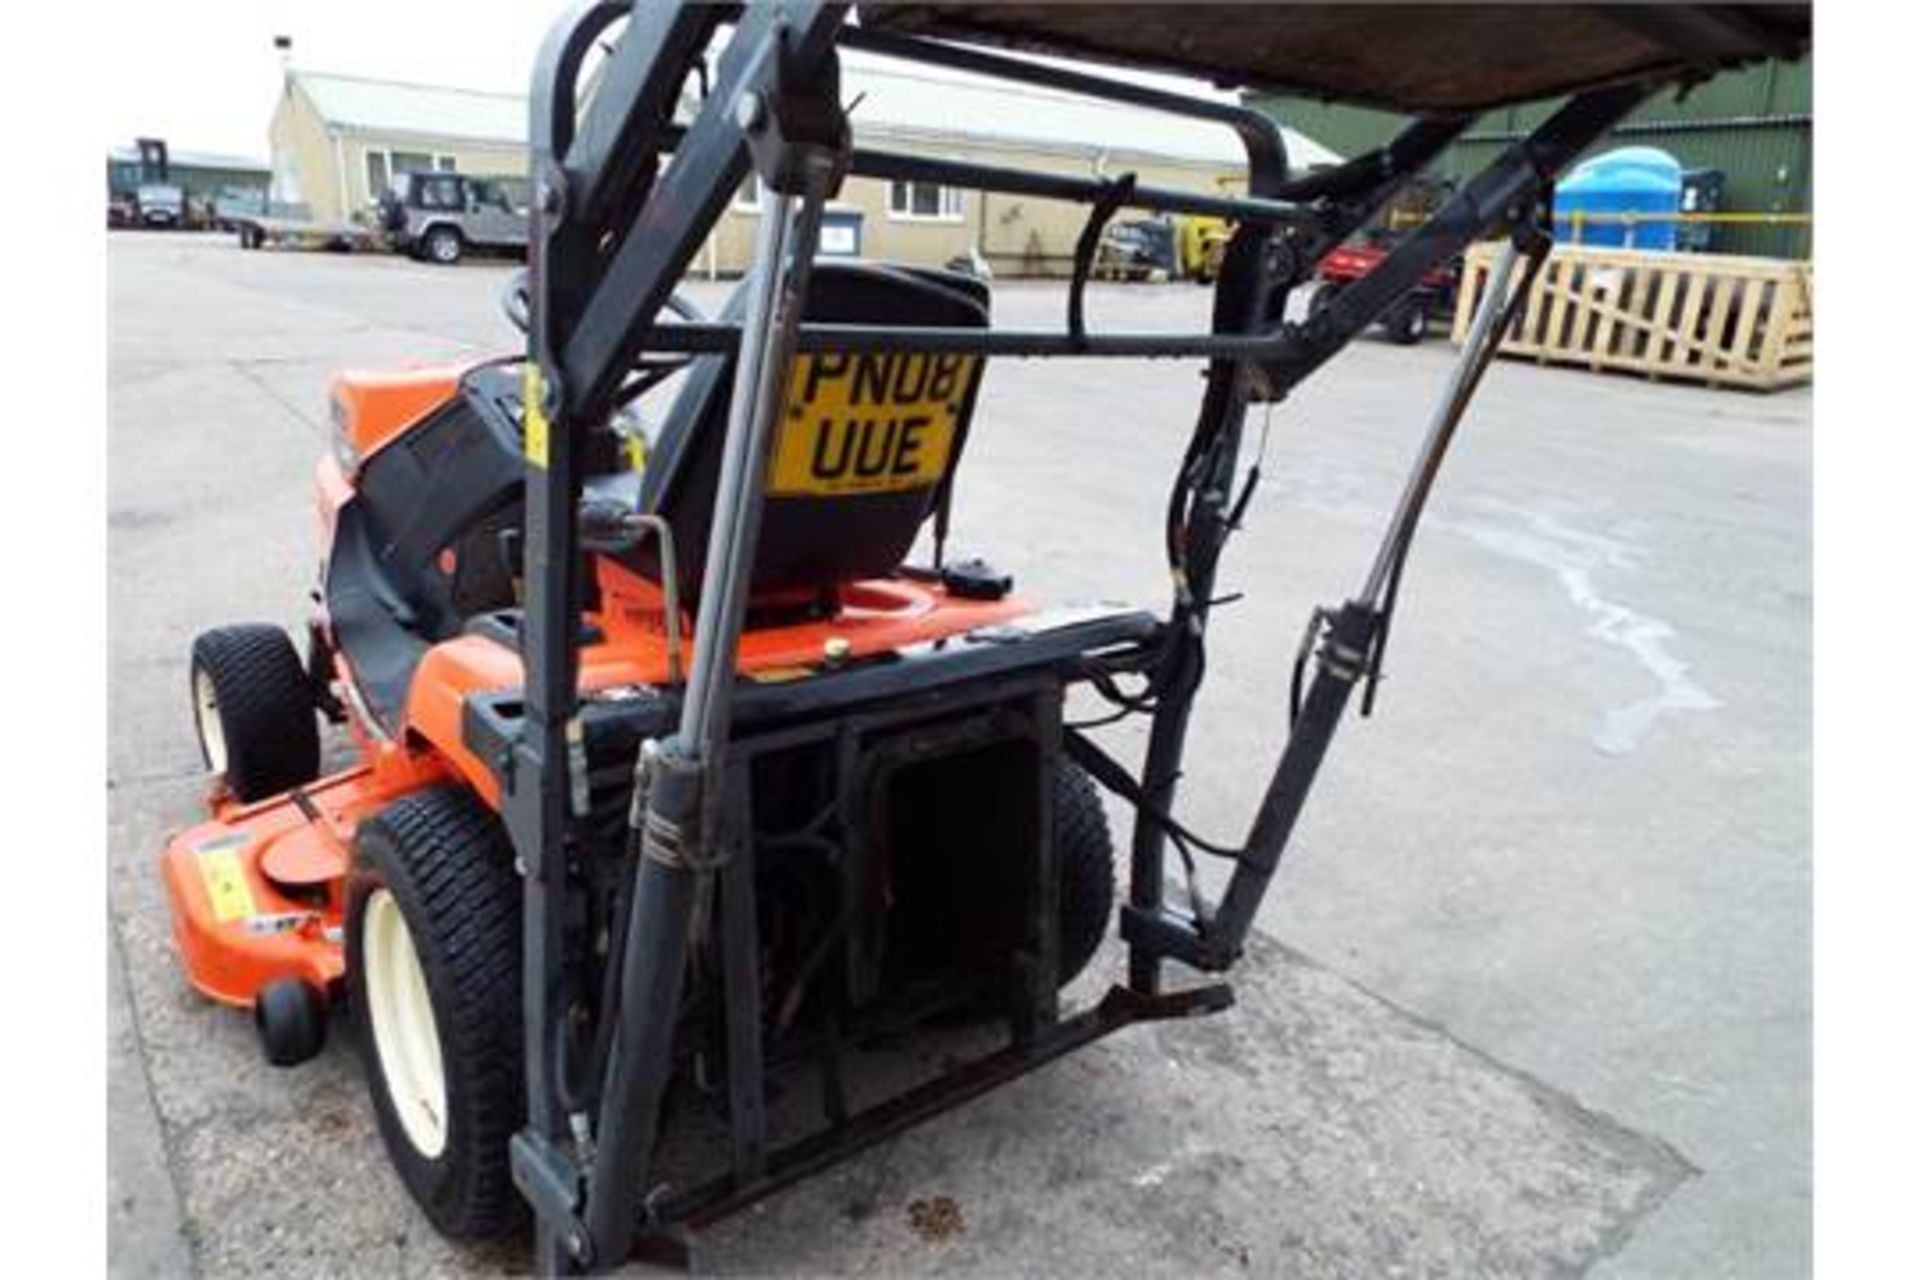 2008 Kubota G21 Ride On Mower with Glide-Cut System and High Dump Grass Collector - Image 10 of 22